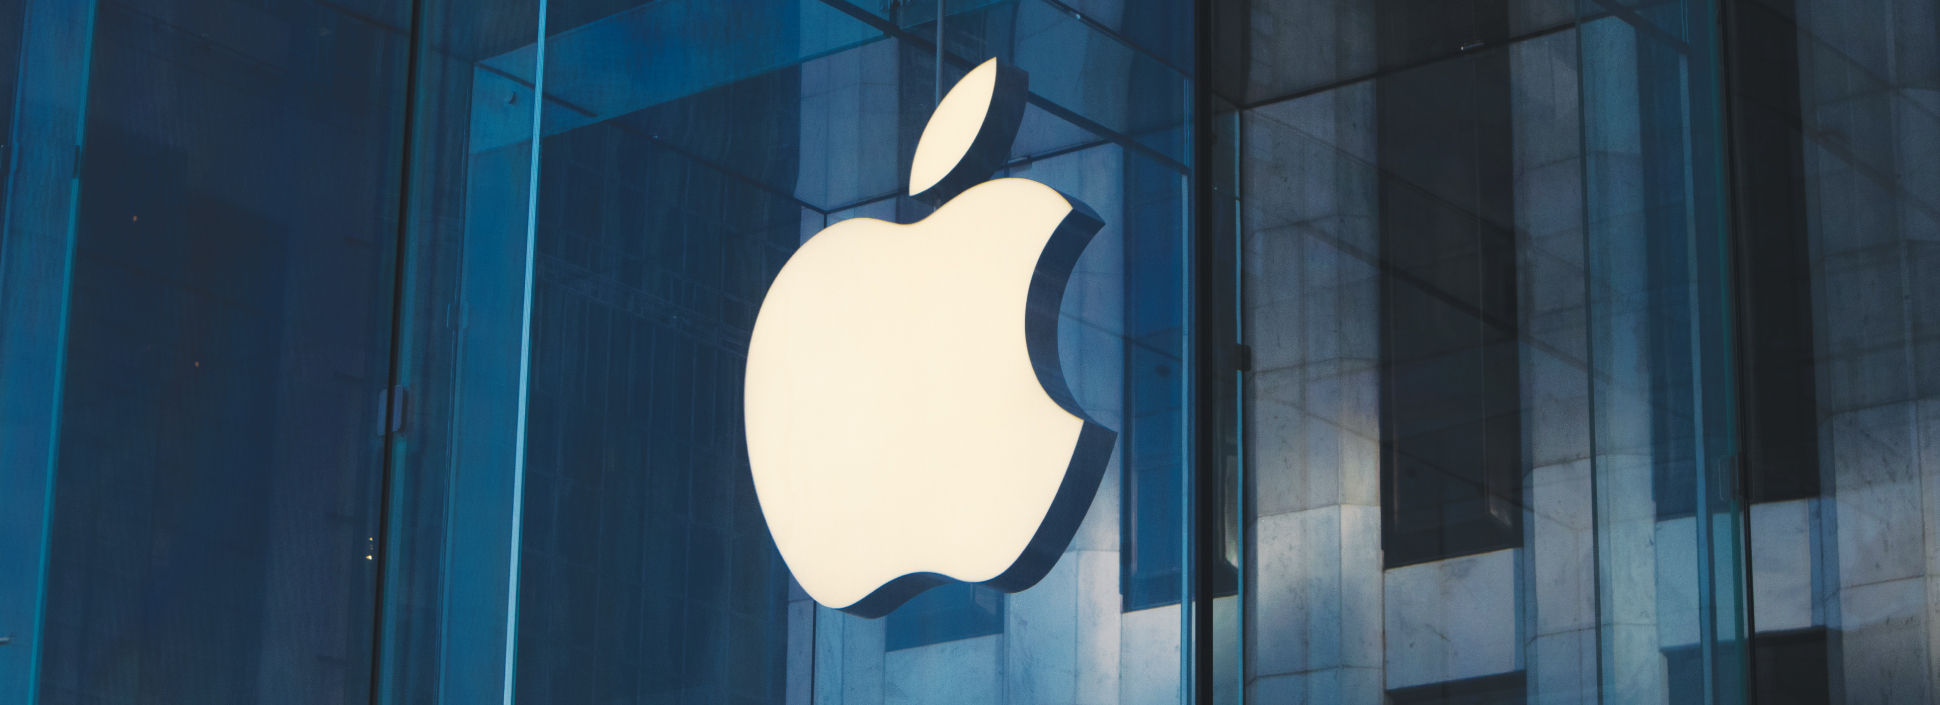 How to Invest in Apple 3 Quick Steps